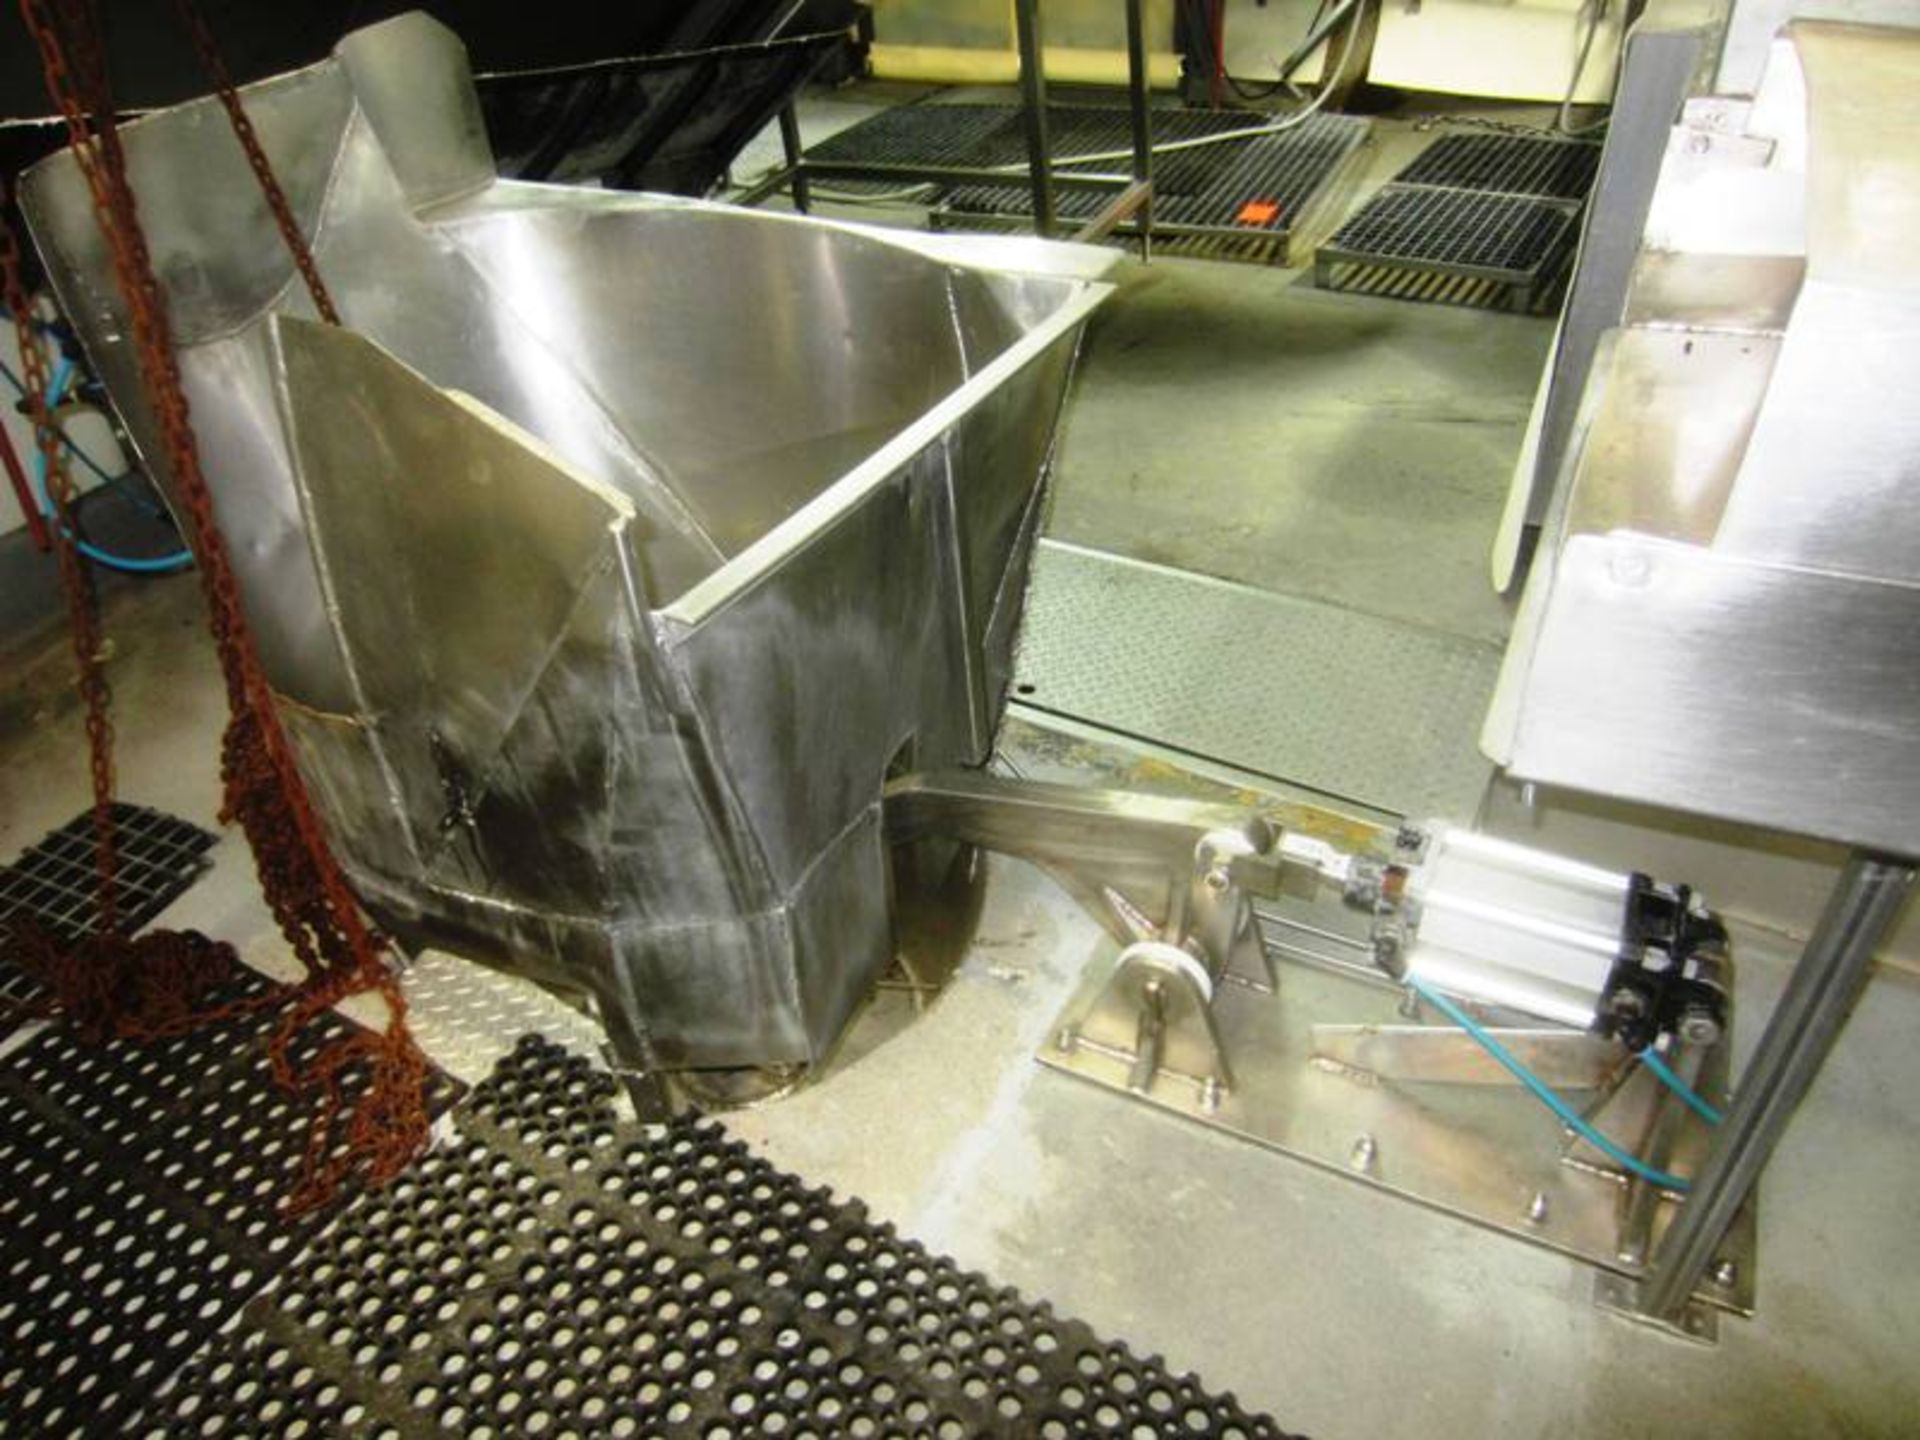 TecFood Mdl. V20 S.S. Stomach Washer with s.s. loader 3' W X 5' L, complete with rail, overhead work - Image 7 of 8